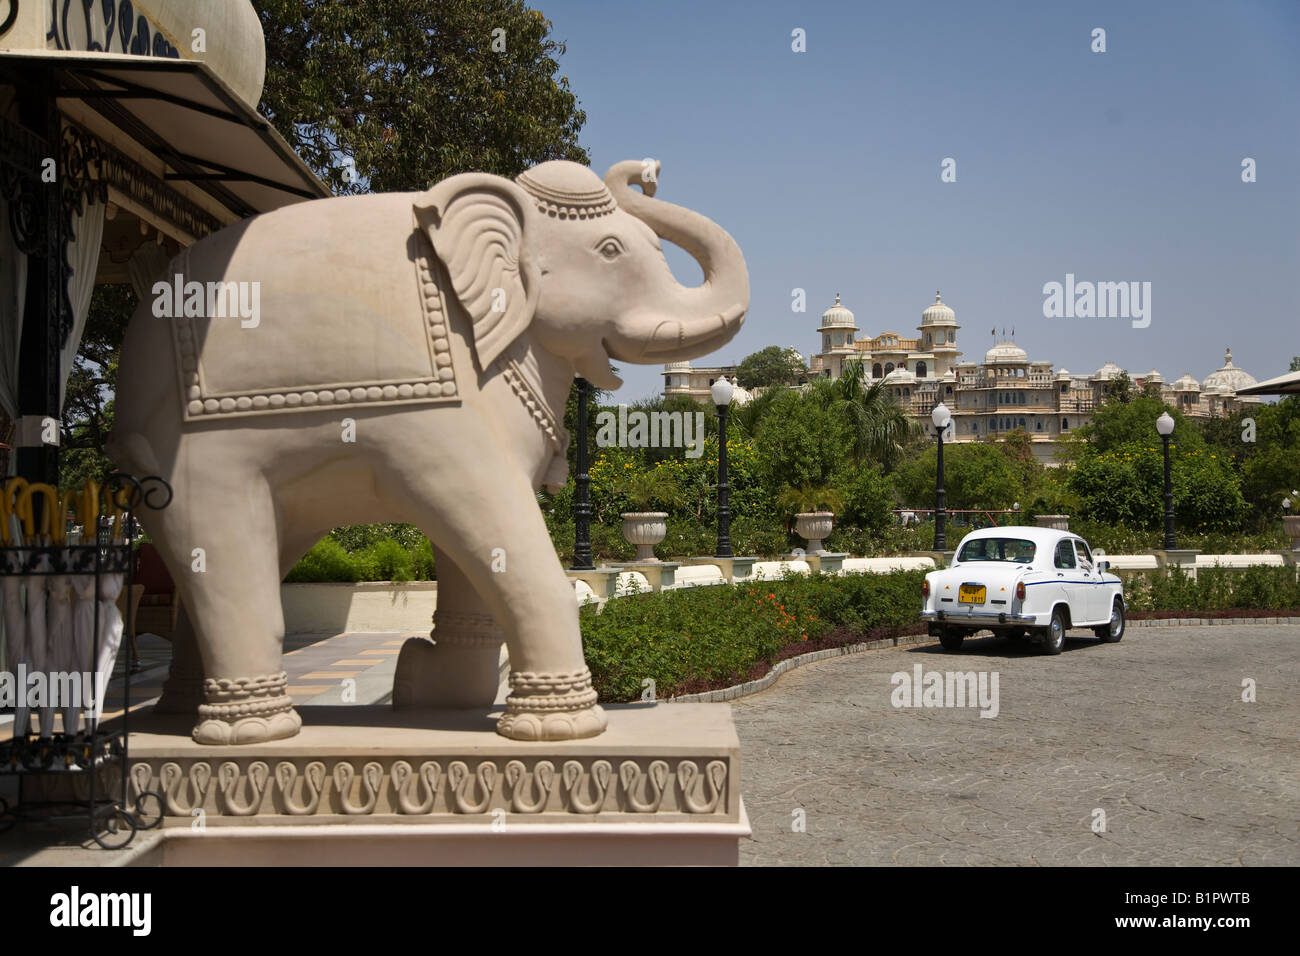 An AMBASSADOR CAR is available for guests at the CITY PALACE of UDAIPUR RAJASTHAN INDIA Stock Photo